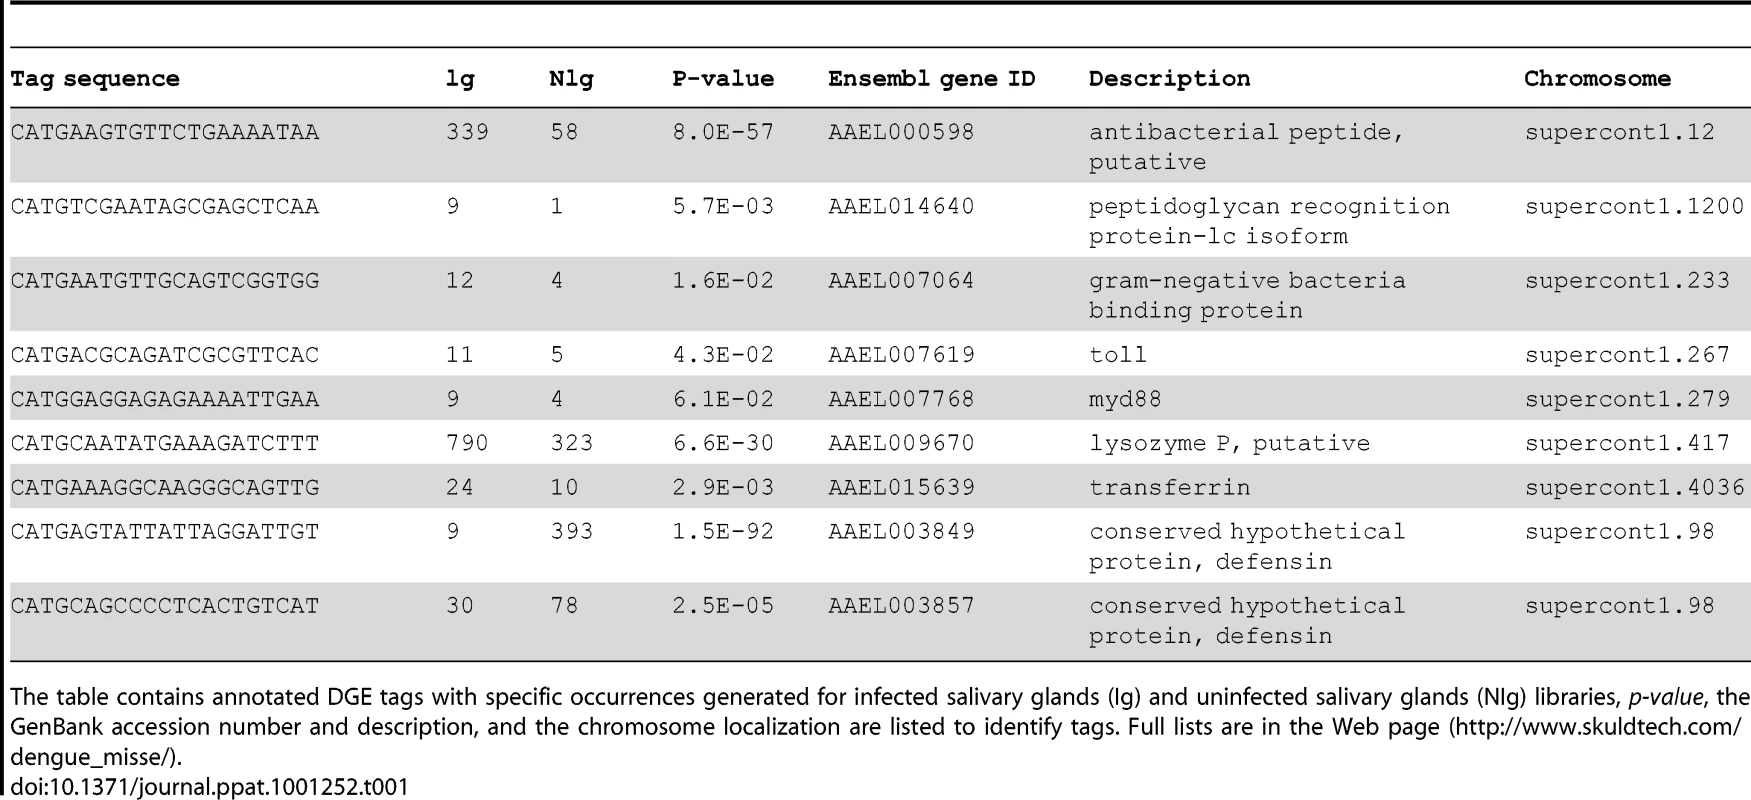 List of differentially expressed genes that are discussed in the text.